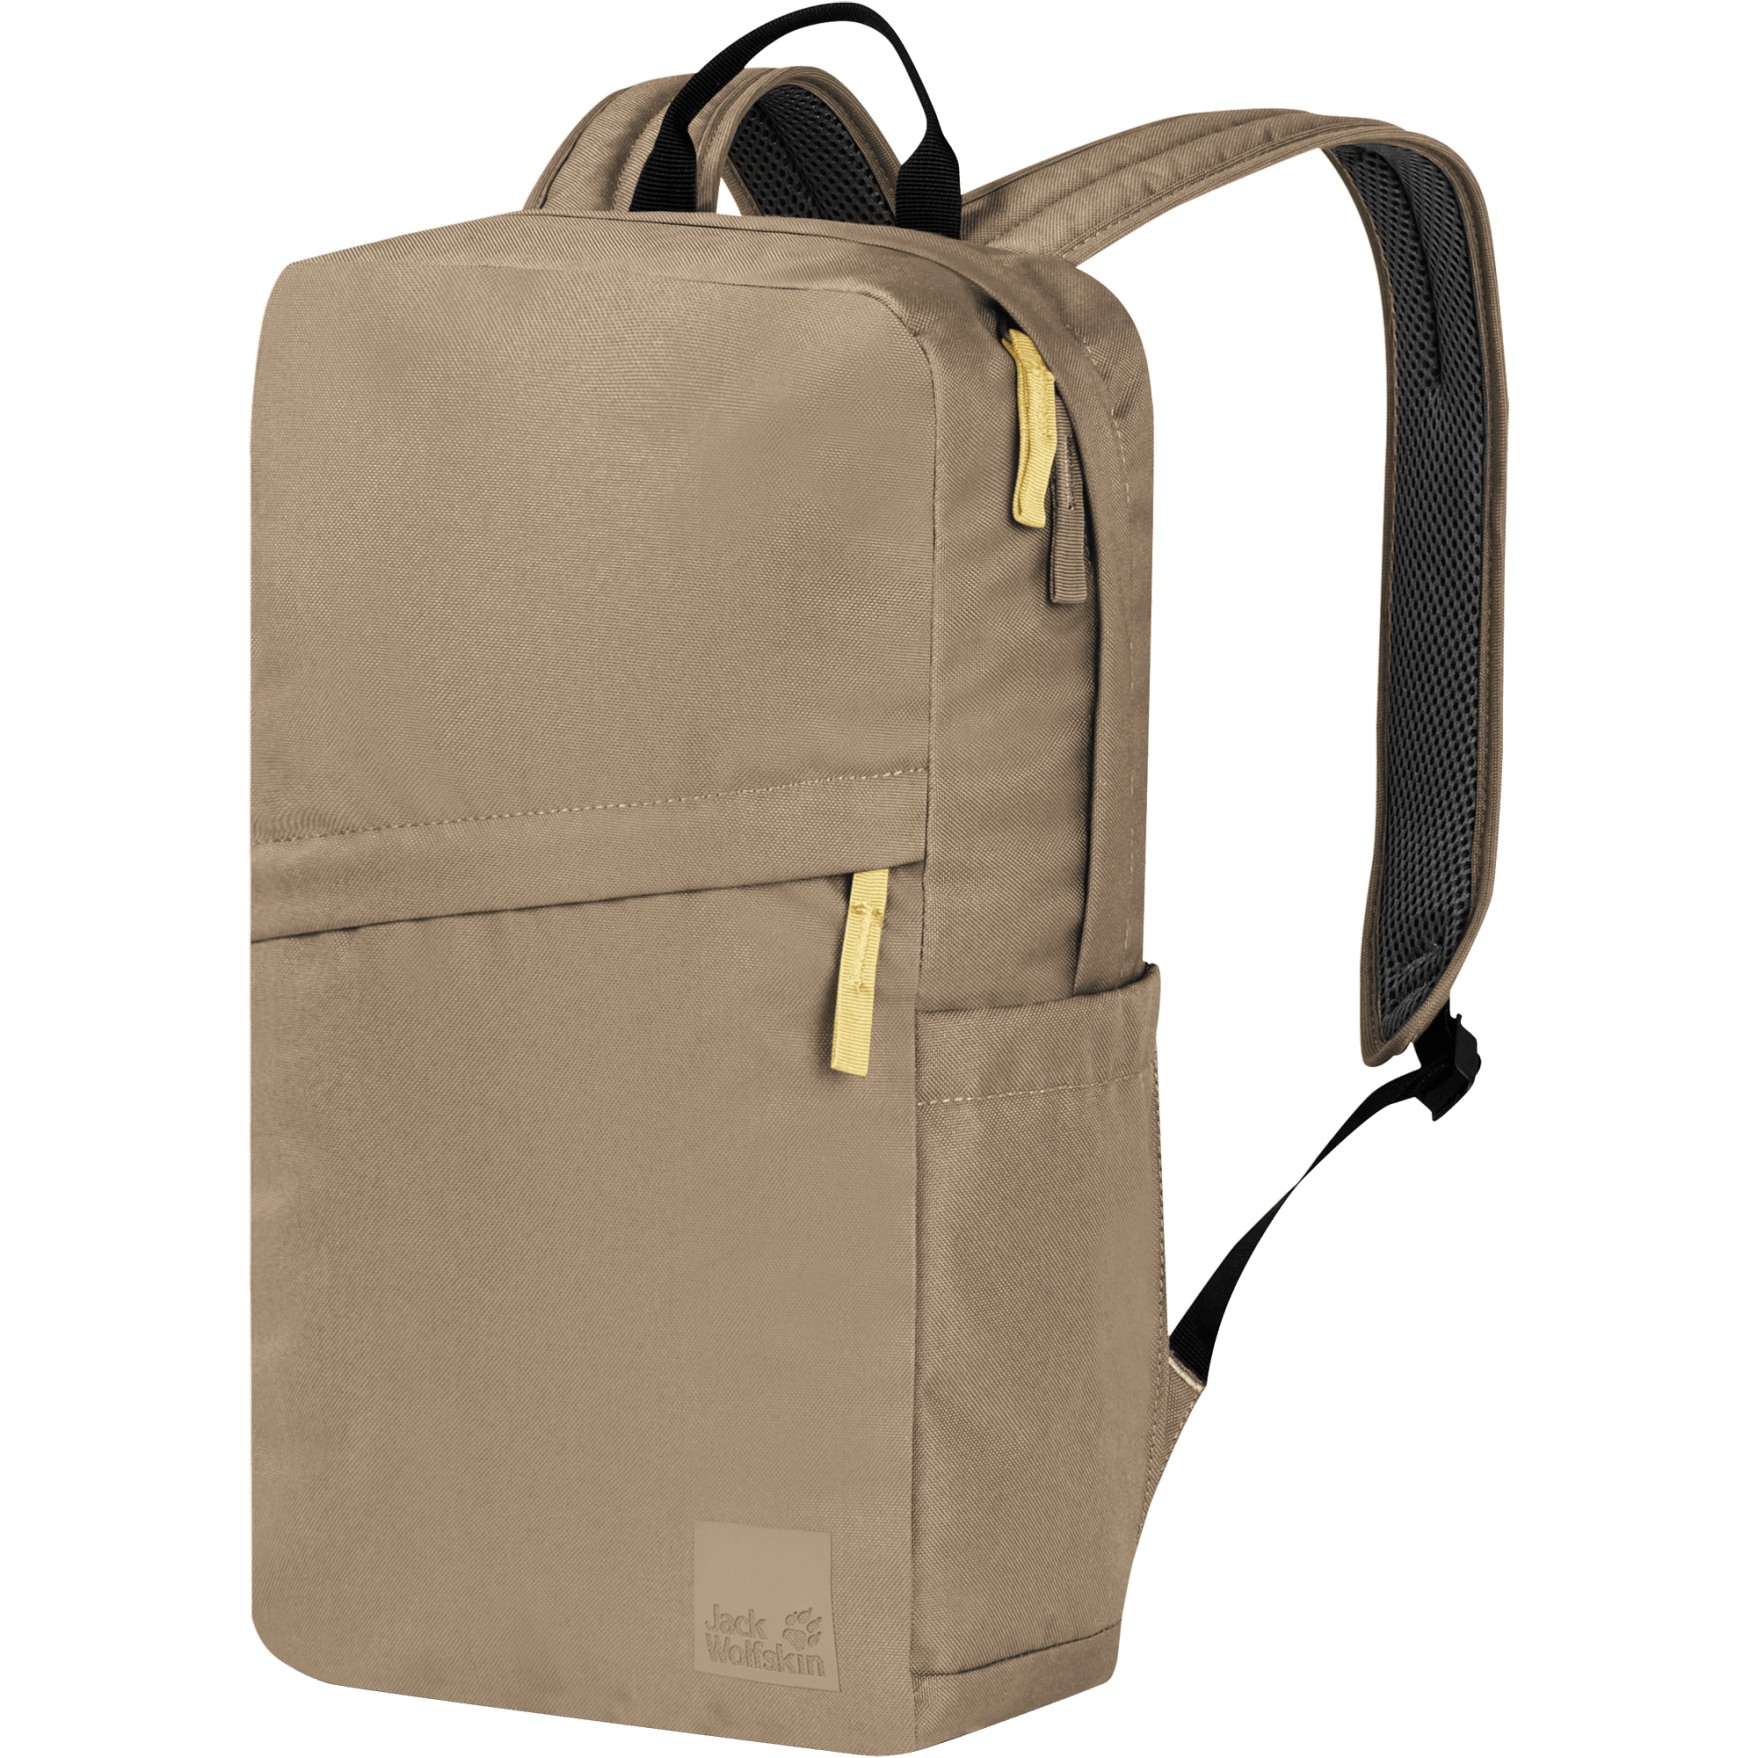 Picture of Jack Wolfskin Cariboo Backpack - sand dune